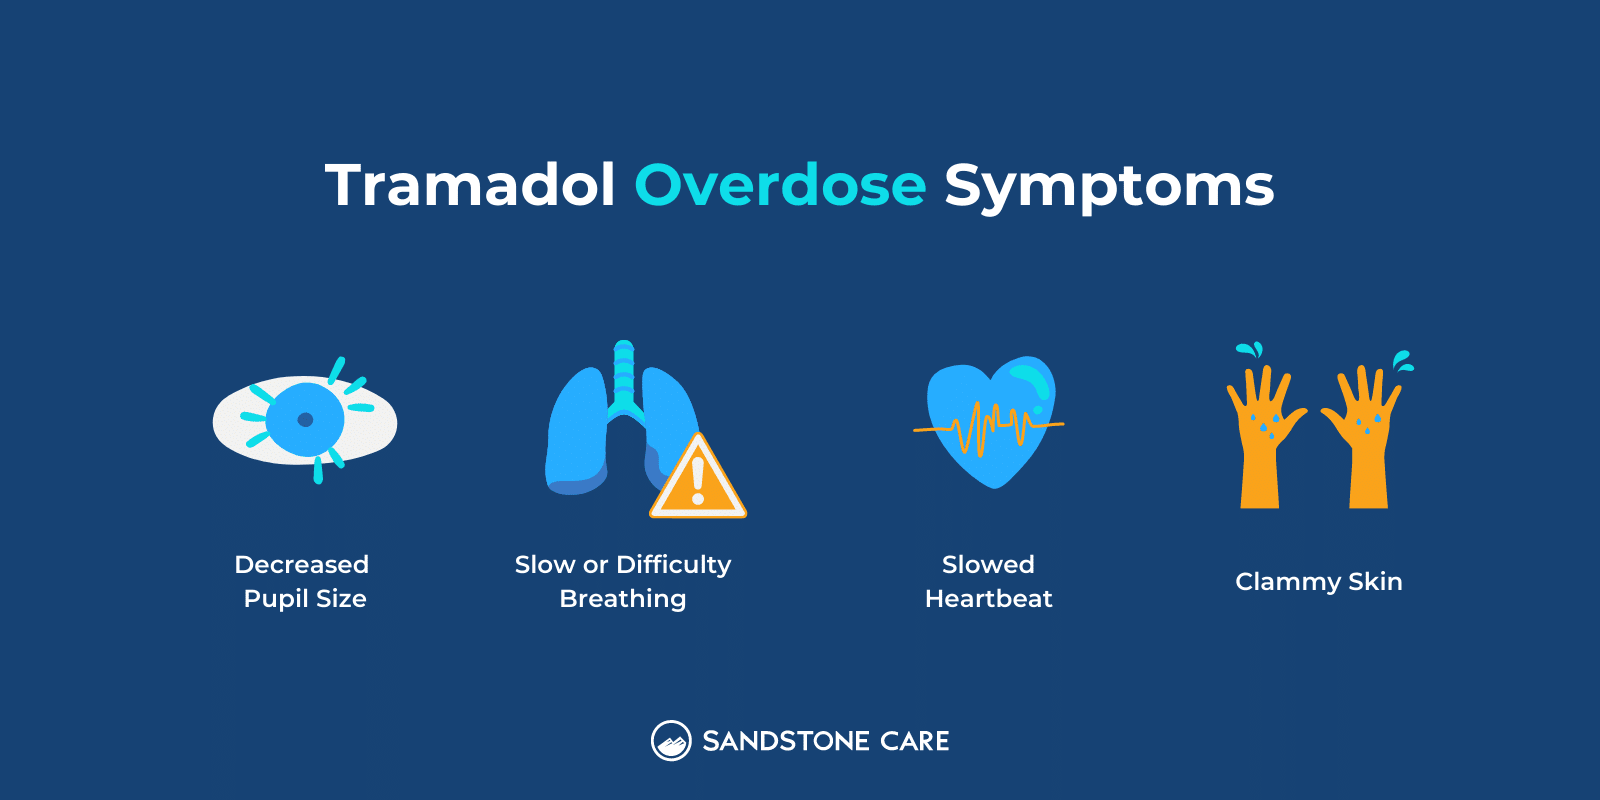 Tramadol Overdose Symptoms text written on top of list items and relevant illustration: Decreased Pupil Size, Slow or Difficulty Breathing, Slowed Heartbeat, Clammy Skin